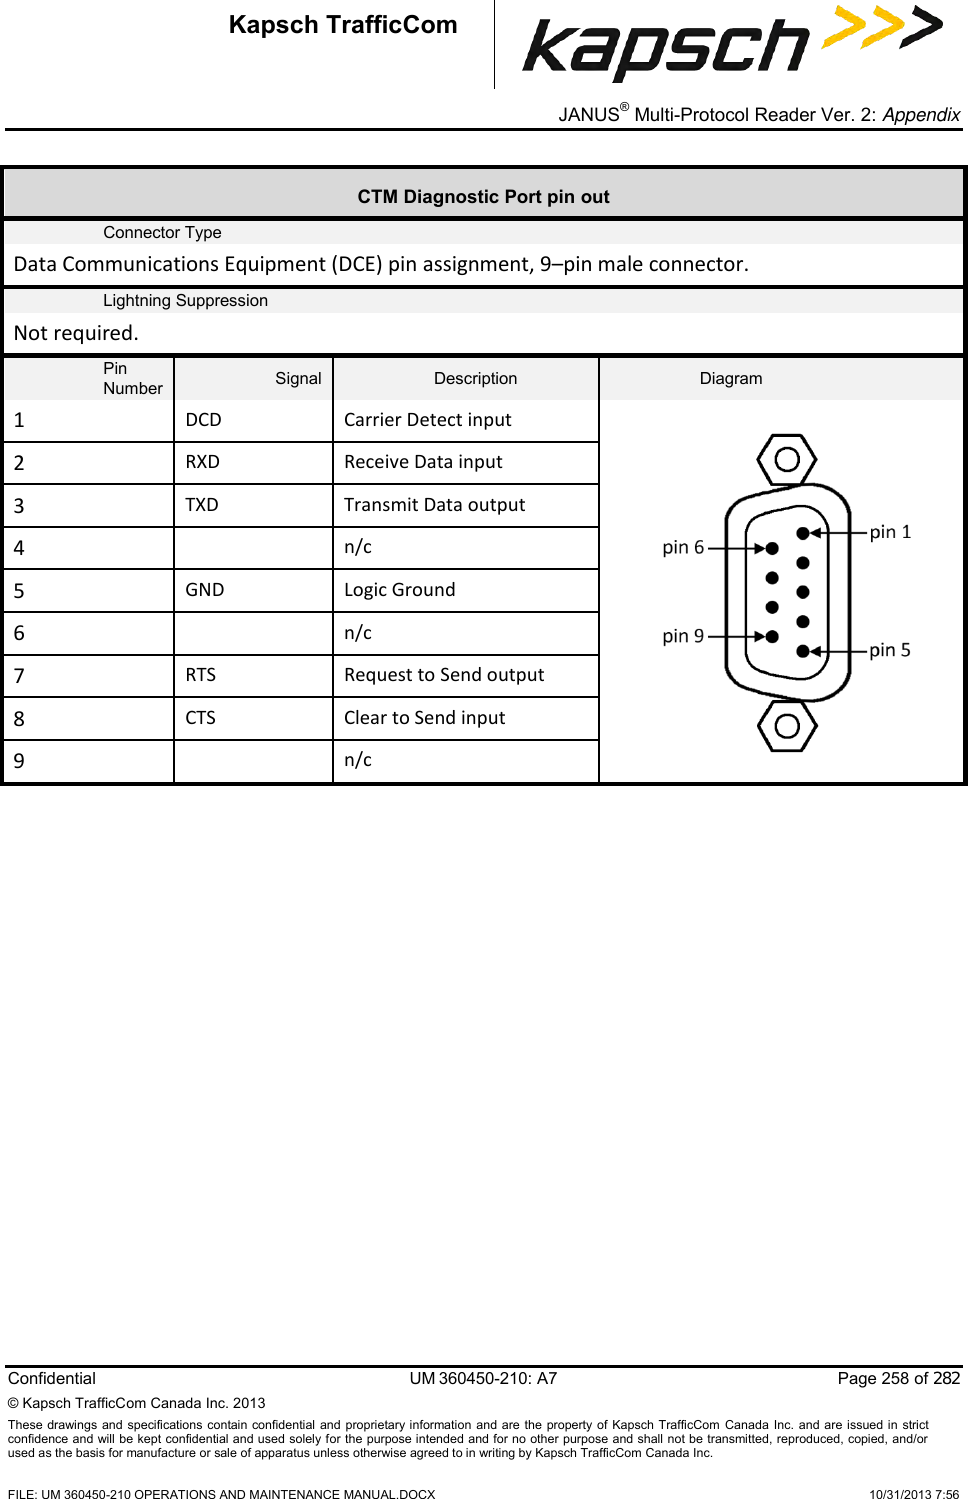 _ JANUS® Multi-Protocol Reader Ver. 2: Appendix  Confidential  UM 360450-210: A7  Page 258 of 282 © Kapsch TrafficCom Canada Inc. 2013 These  drawings and specifications contain confidential  and  proprietary information and are  the  property of Kapsch TrafficCom  Canada Inc.  and are issued in strict confidence and will be kept confidential and used solely for the purpose intended and for no other purpose and shall not be transmitted, reproduced, copied, and/or used as the basis for manufacture or sale of apparatus unless otherwise agreed to in writing by Kapsch TrafficCom Canada Inc.    FILE: UM 360450-210 OPERATIONS AND MAINTENANCE MANUAL.DOCX    10/31/2013 7:56 Kapsch TrafficCom CTM Diagnostic Port pin out Connector Type Data Communications Equipment (DCE) pin assignment, 9–pin male connector. Lightning Suppression Not required. Pin Number Signal Description Diagram 1 DCD Carrier Detect input  2 RXD Receive Data input 3 TXD Transmit Data output 4  n/c 5 GND Logic Ground 6  n/c 7 RTS Request to Send output 8 CTS Clear to Send input 9  n/c    